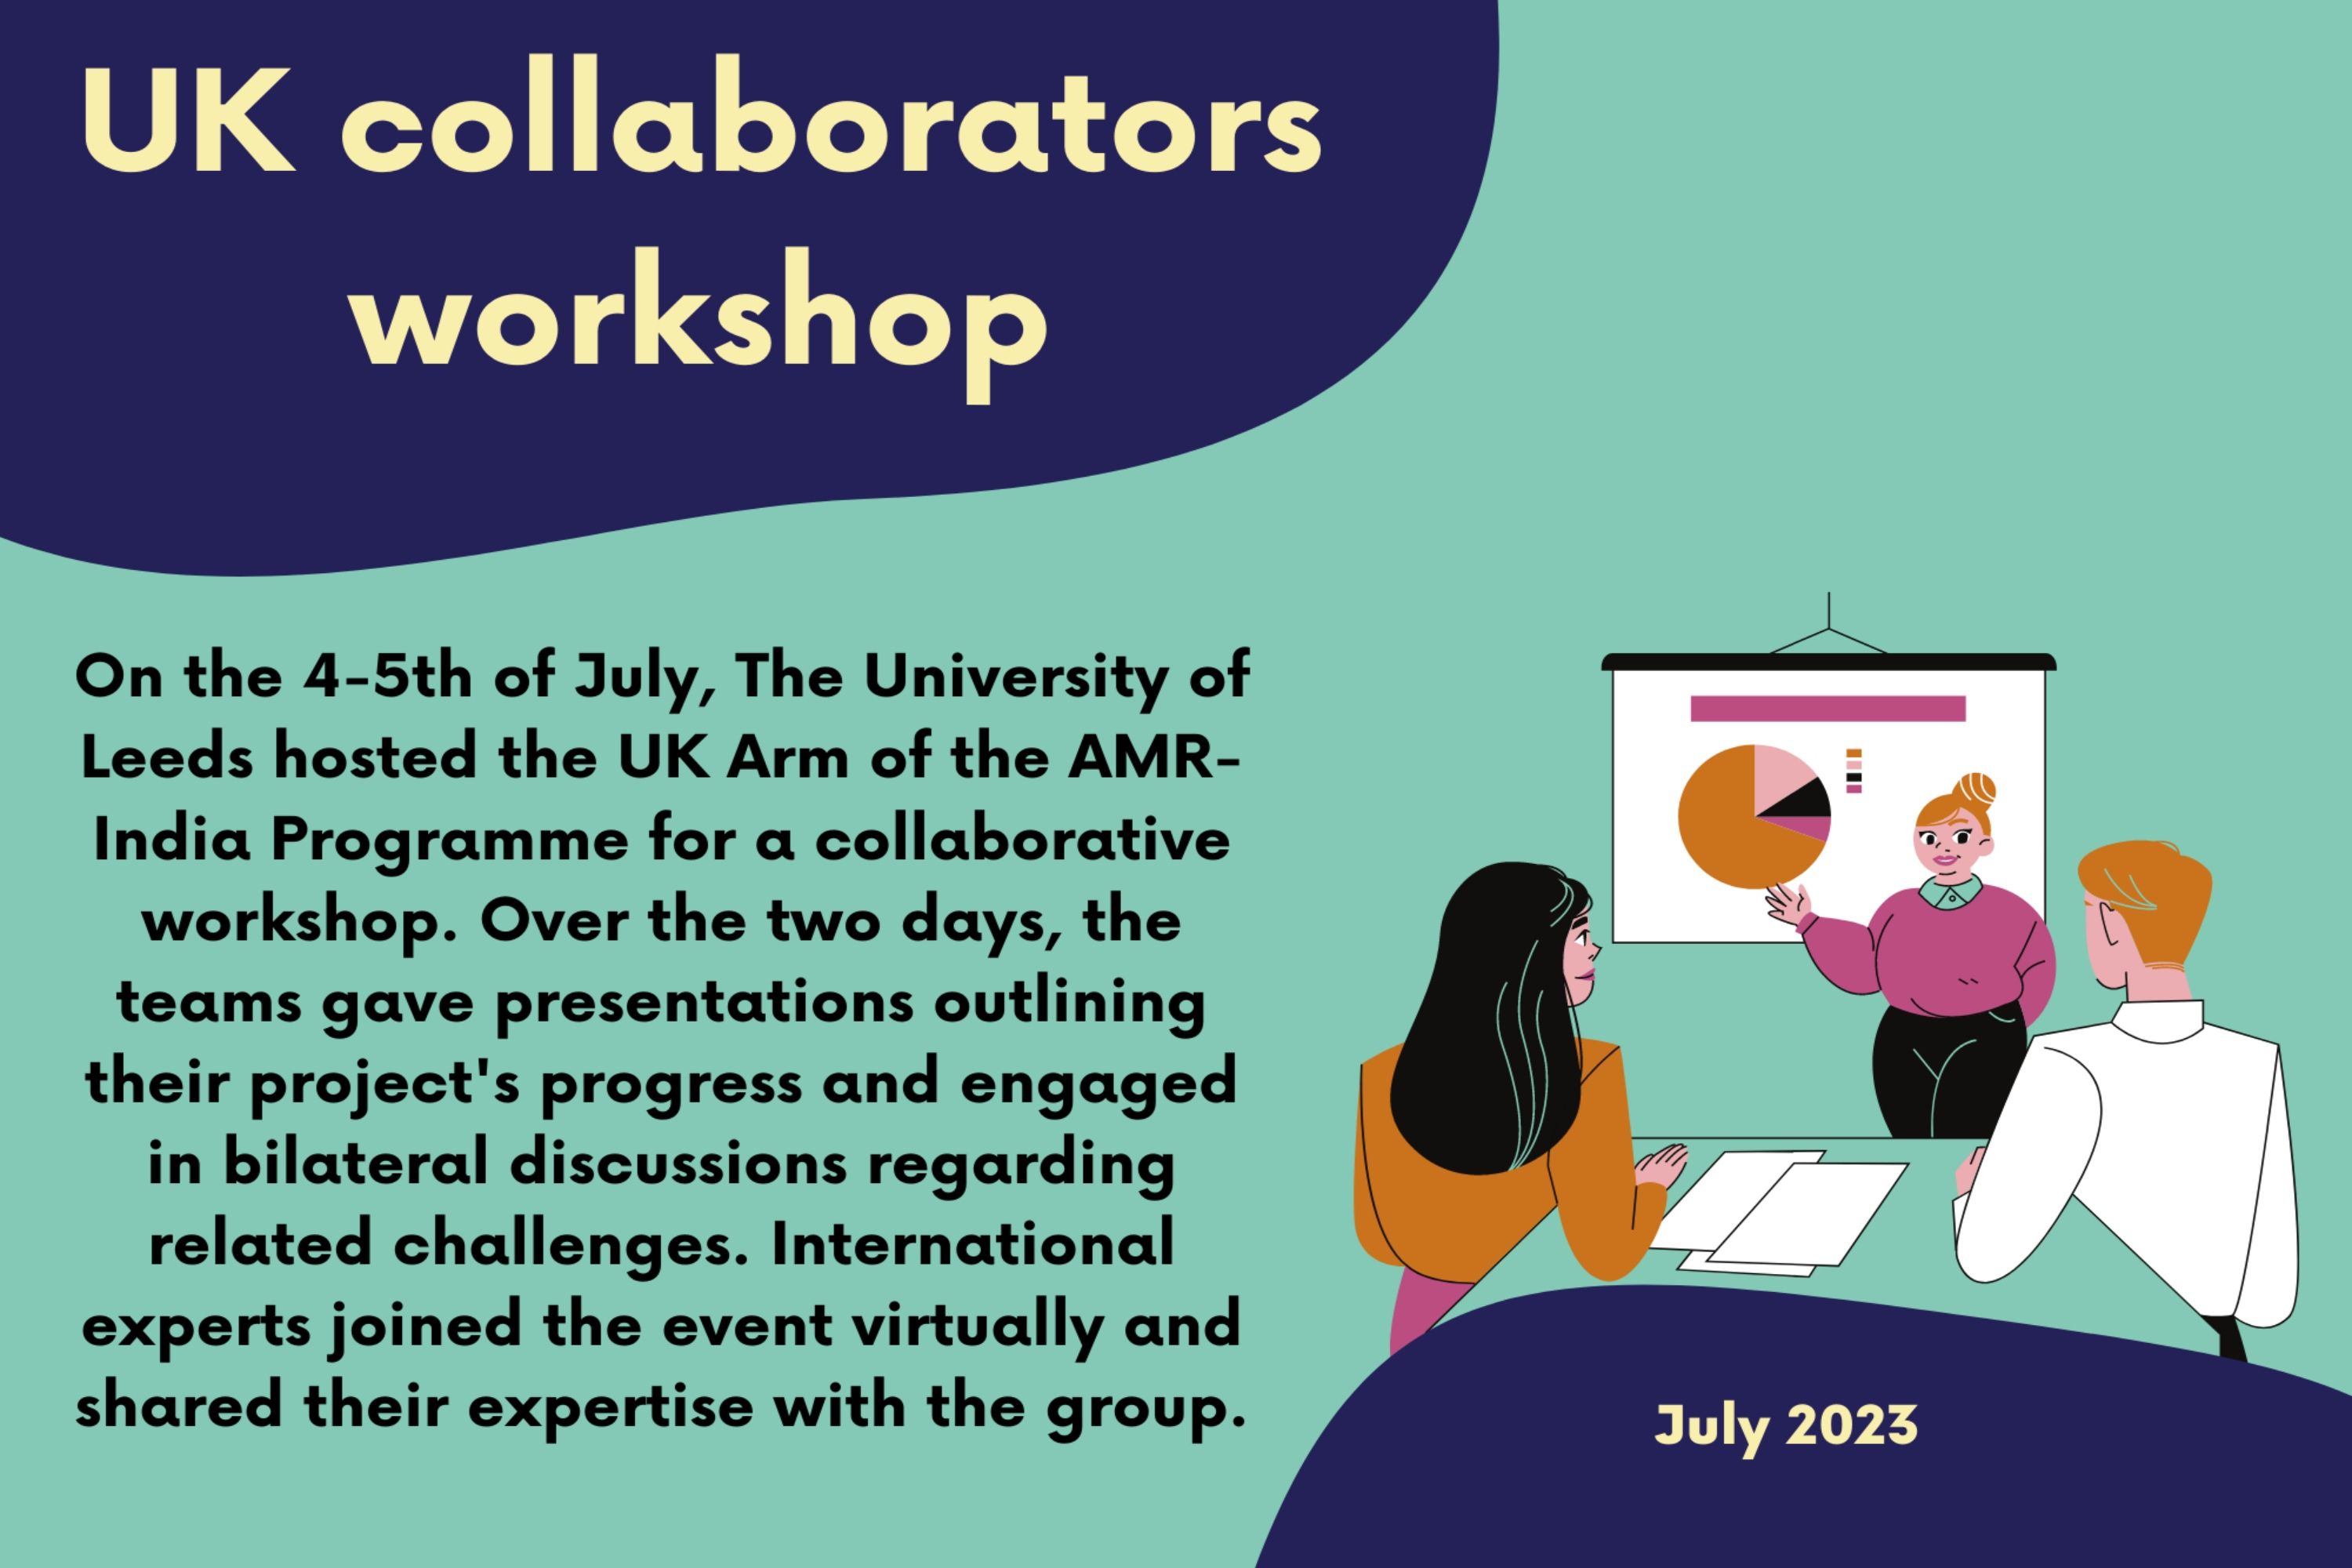 A colourful news graphic outlining the University of Leeds UK collaborators workshop